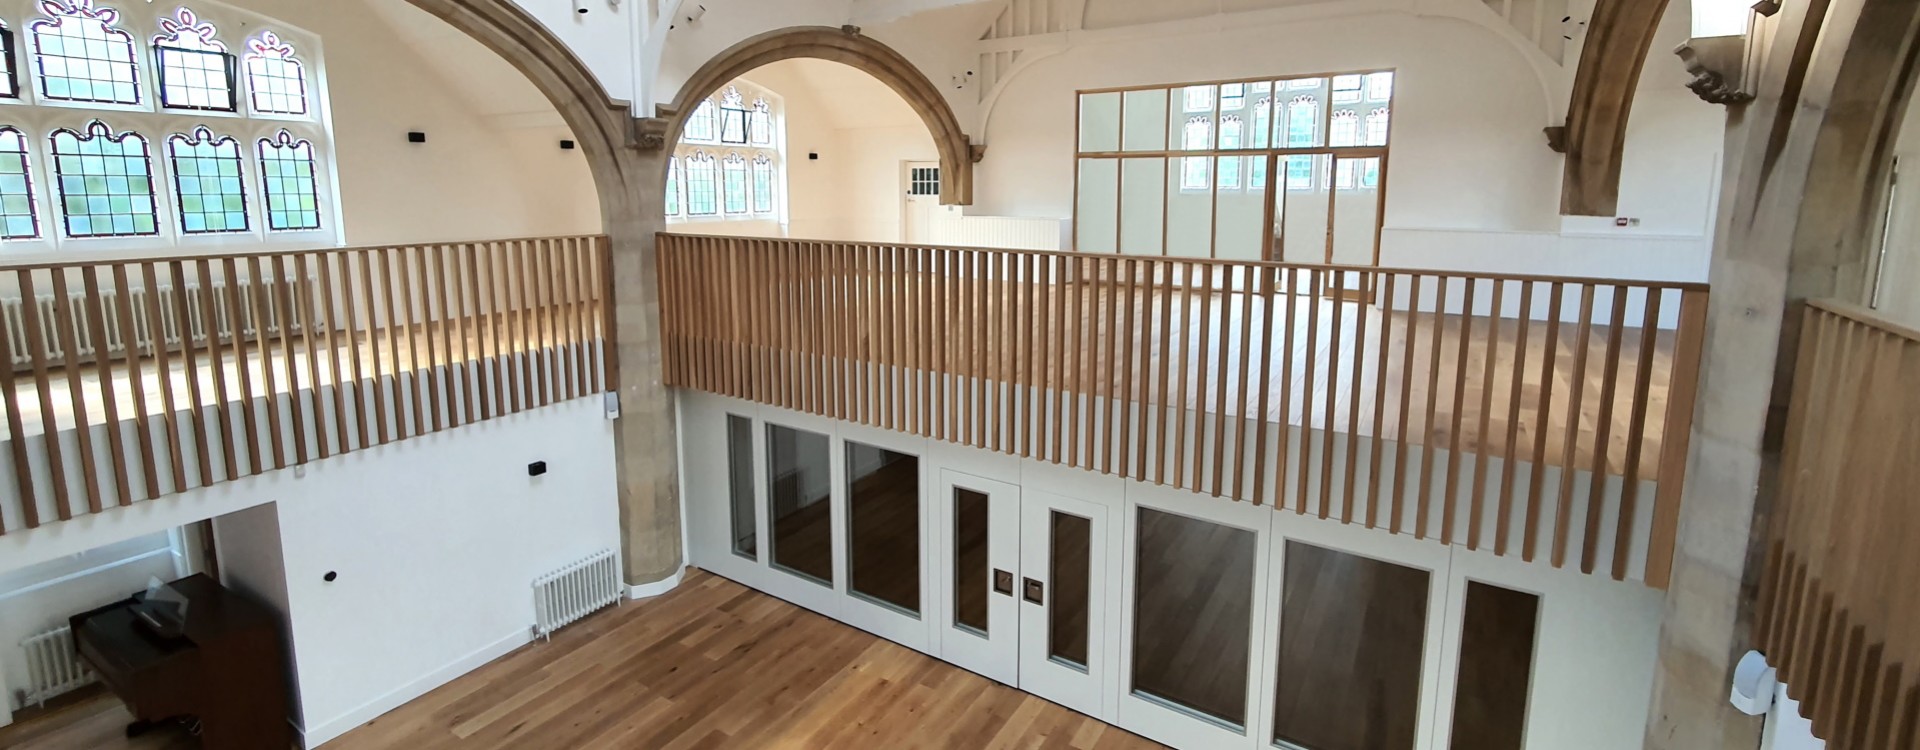 View of new mezzanine level at St Margarets Church in Finchley